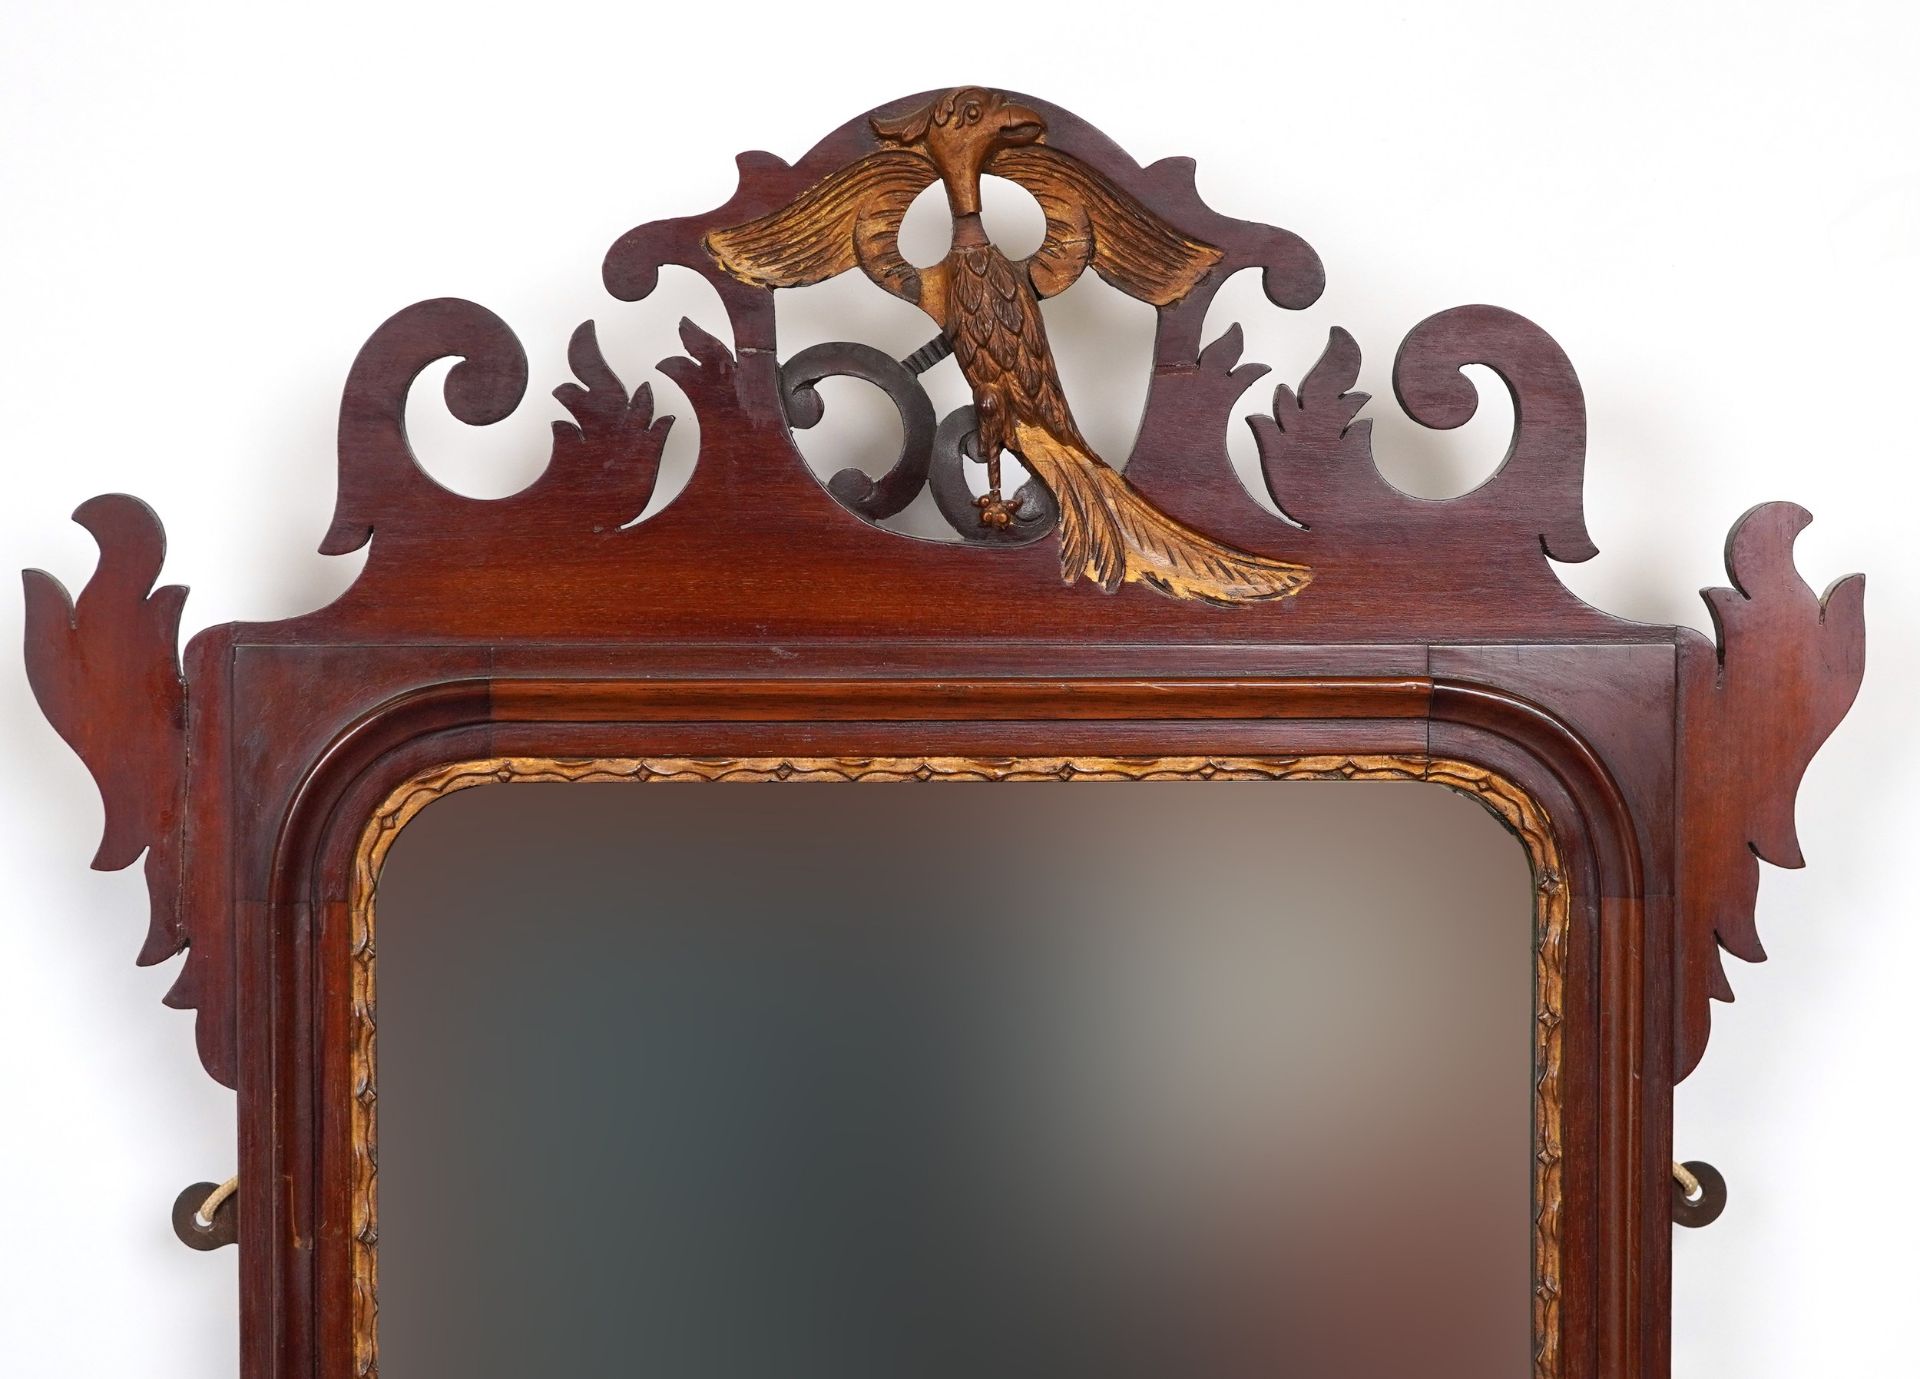 Pair of George III style mahogany pier mirrors with shell inlay and bird carvings, 91.5cm x 51cm : - Image 7 of 8